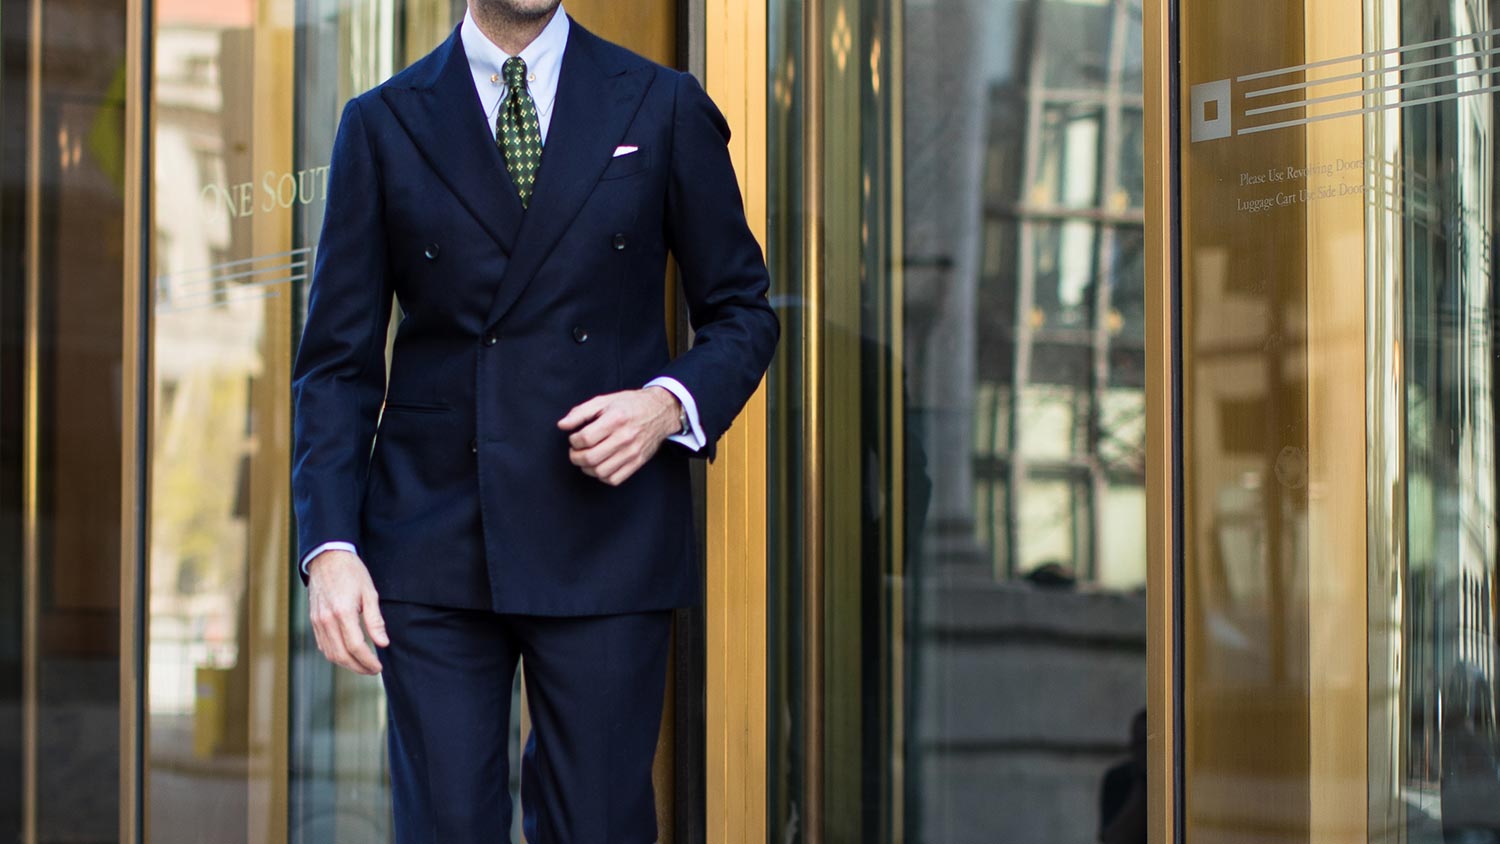 The Basic Guide to Suit Styles For Every Man - Joe Button